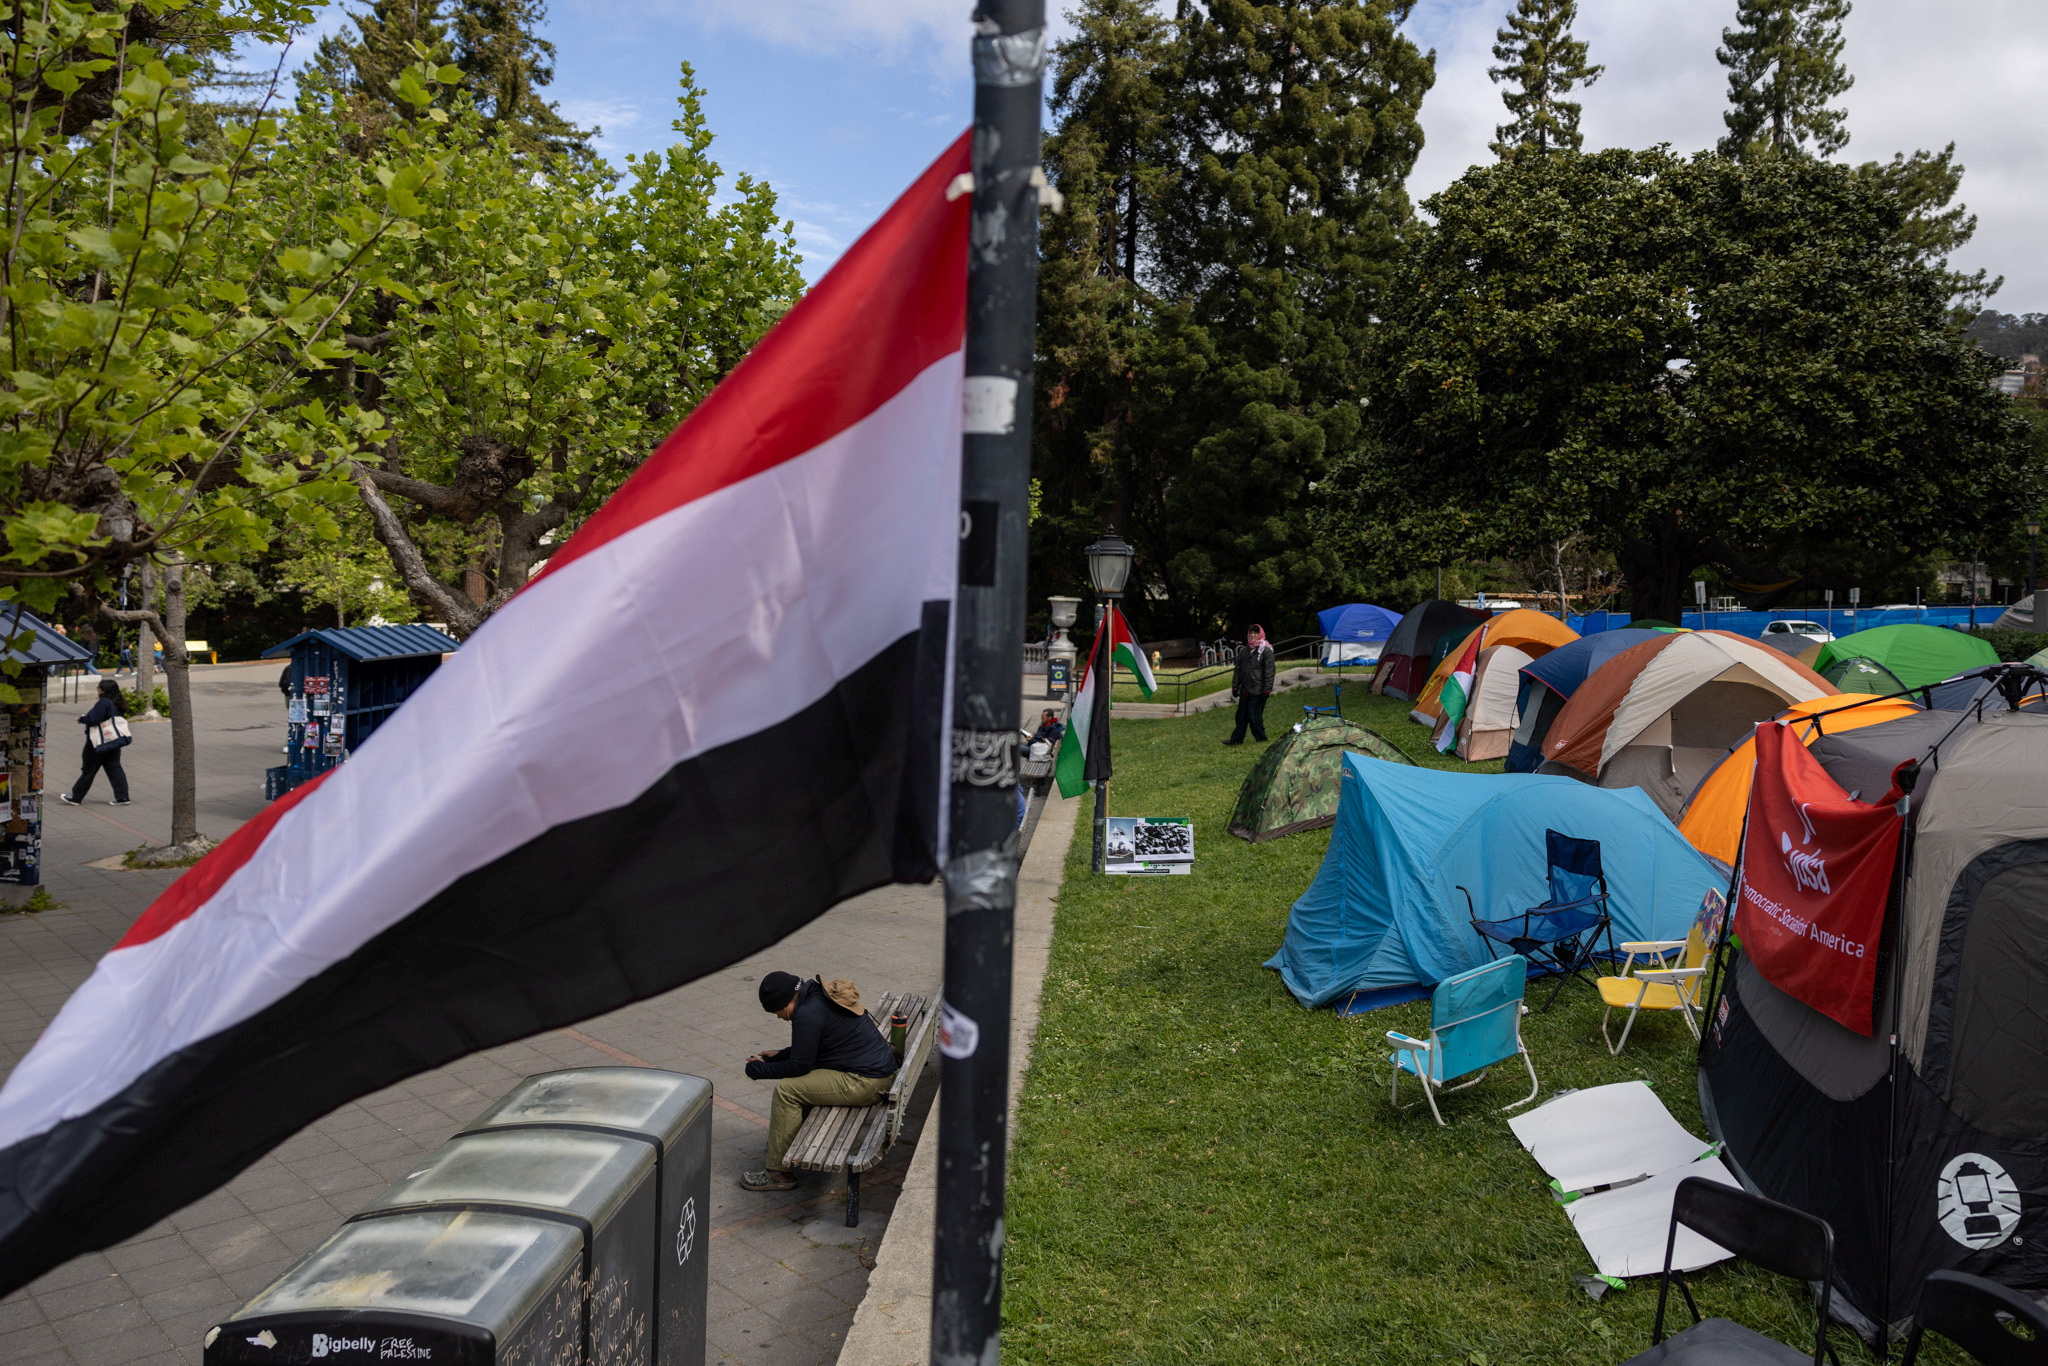 Protests continue at a protest encampment in support of Palestinians at University of California, Berkeley